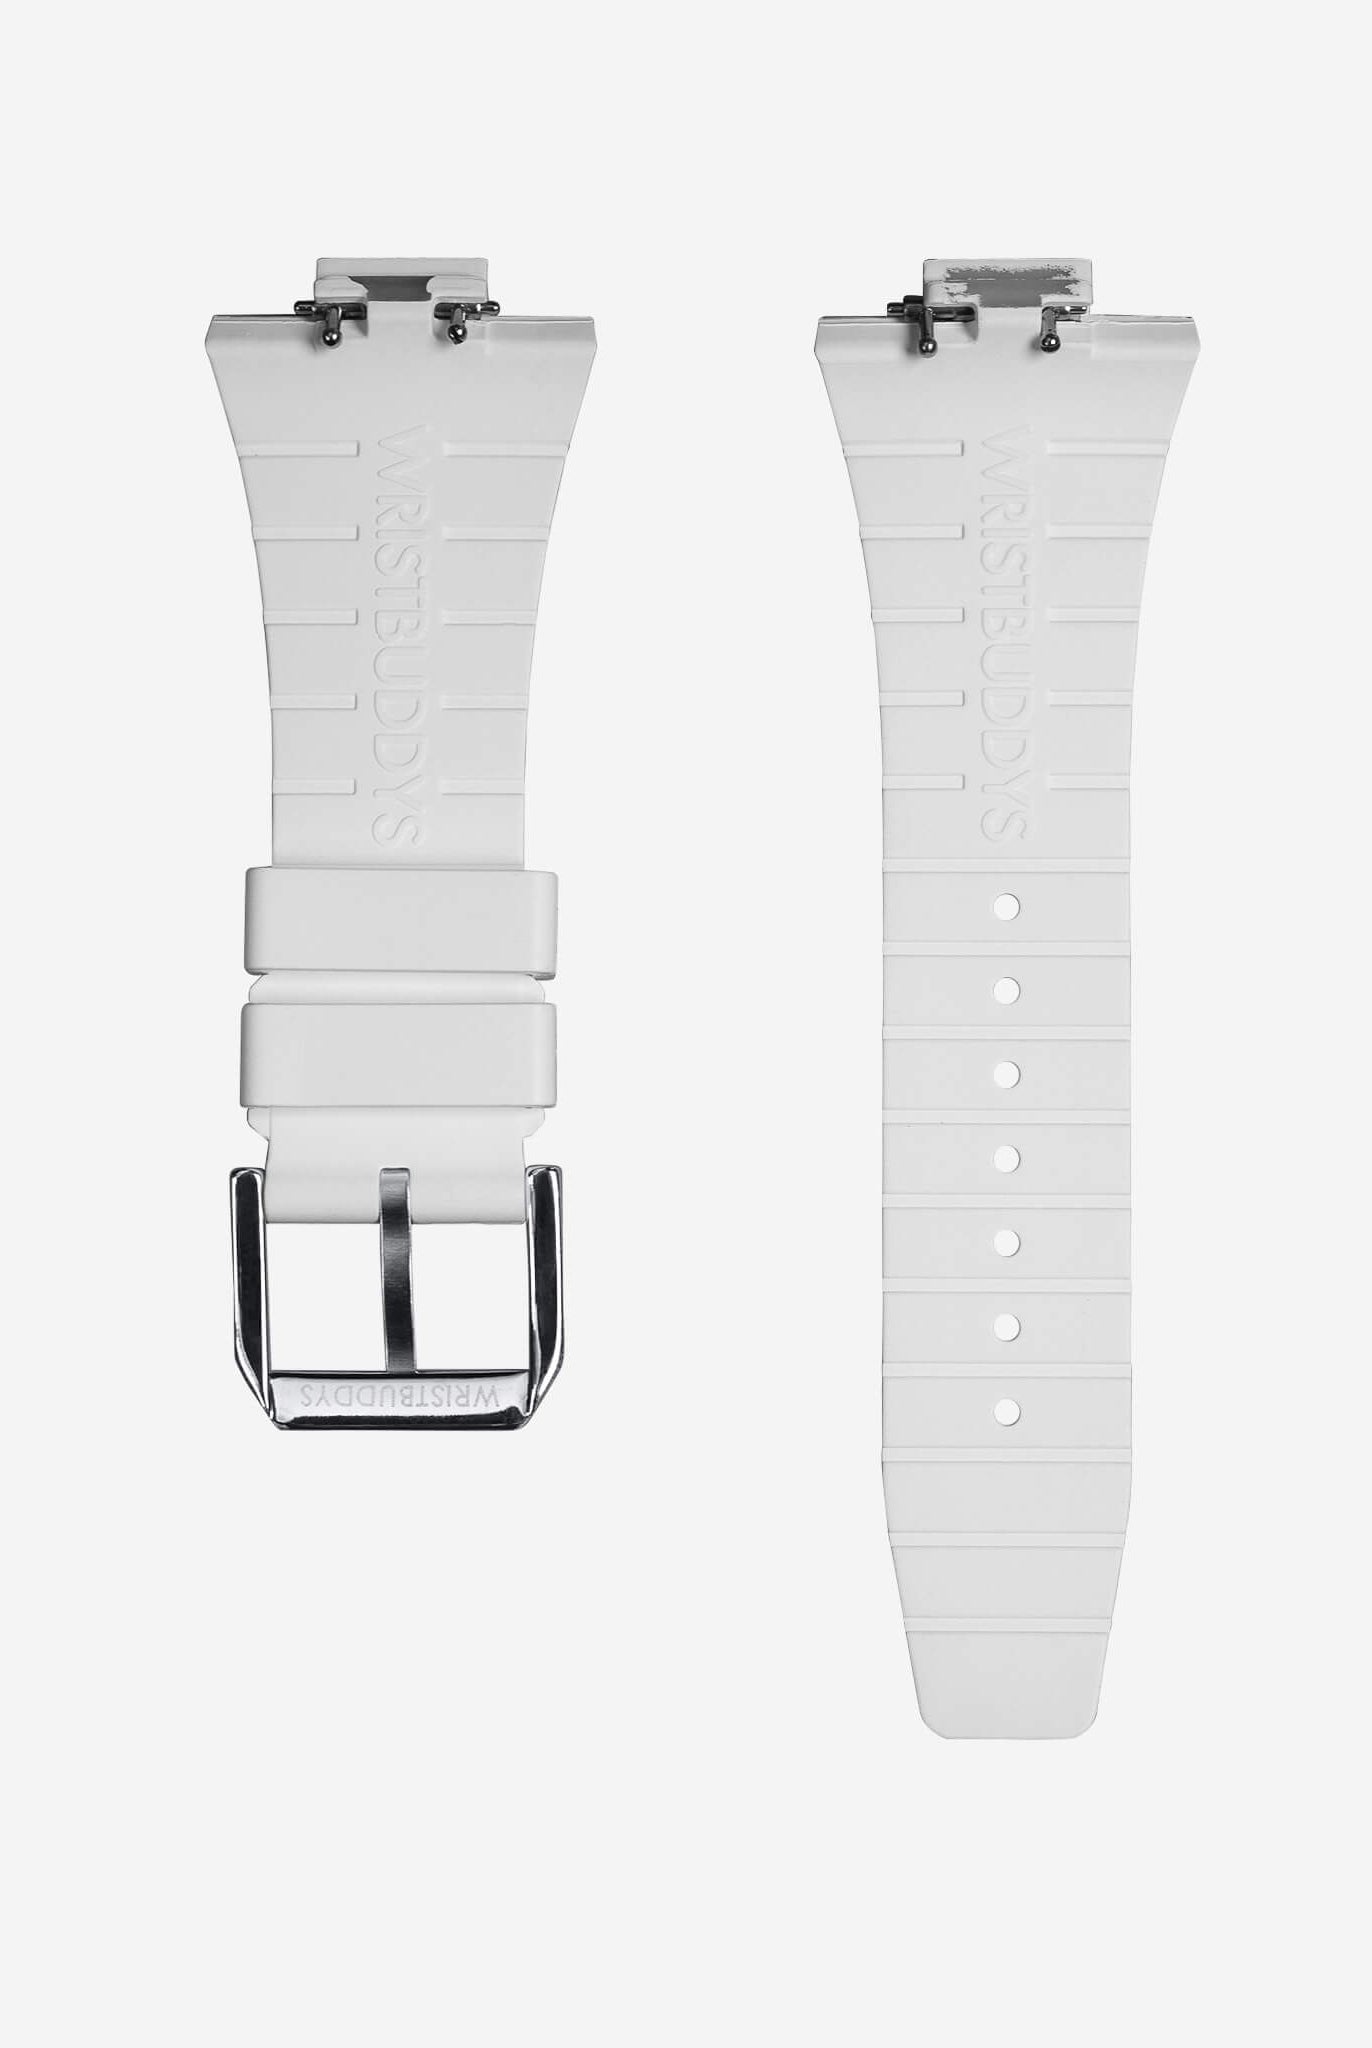  tissot prx straps powermatic 80 rubber perfect fit straps for tissot prx replacement Bracelet alternatives Aftermarket bands Custom straps Wristband choices Rubber band collection upgrades High-quality bands Watch accessories Strap Watchband white weiss vit hvit